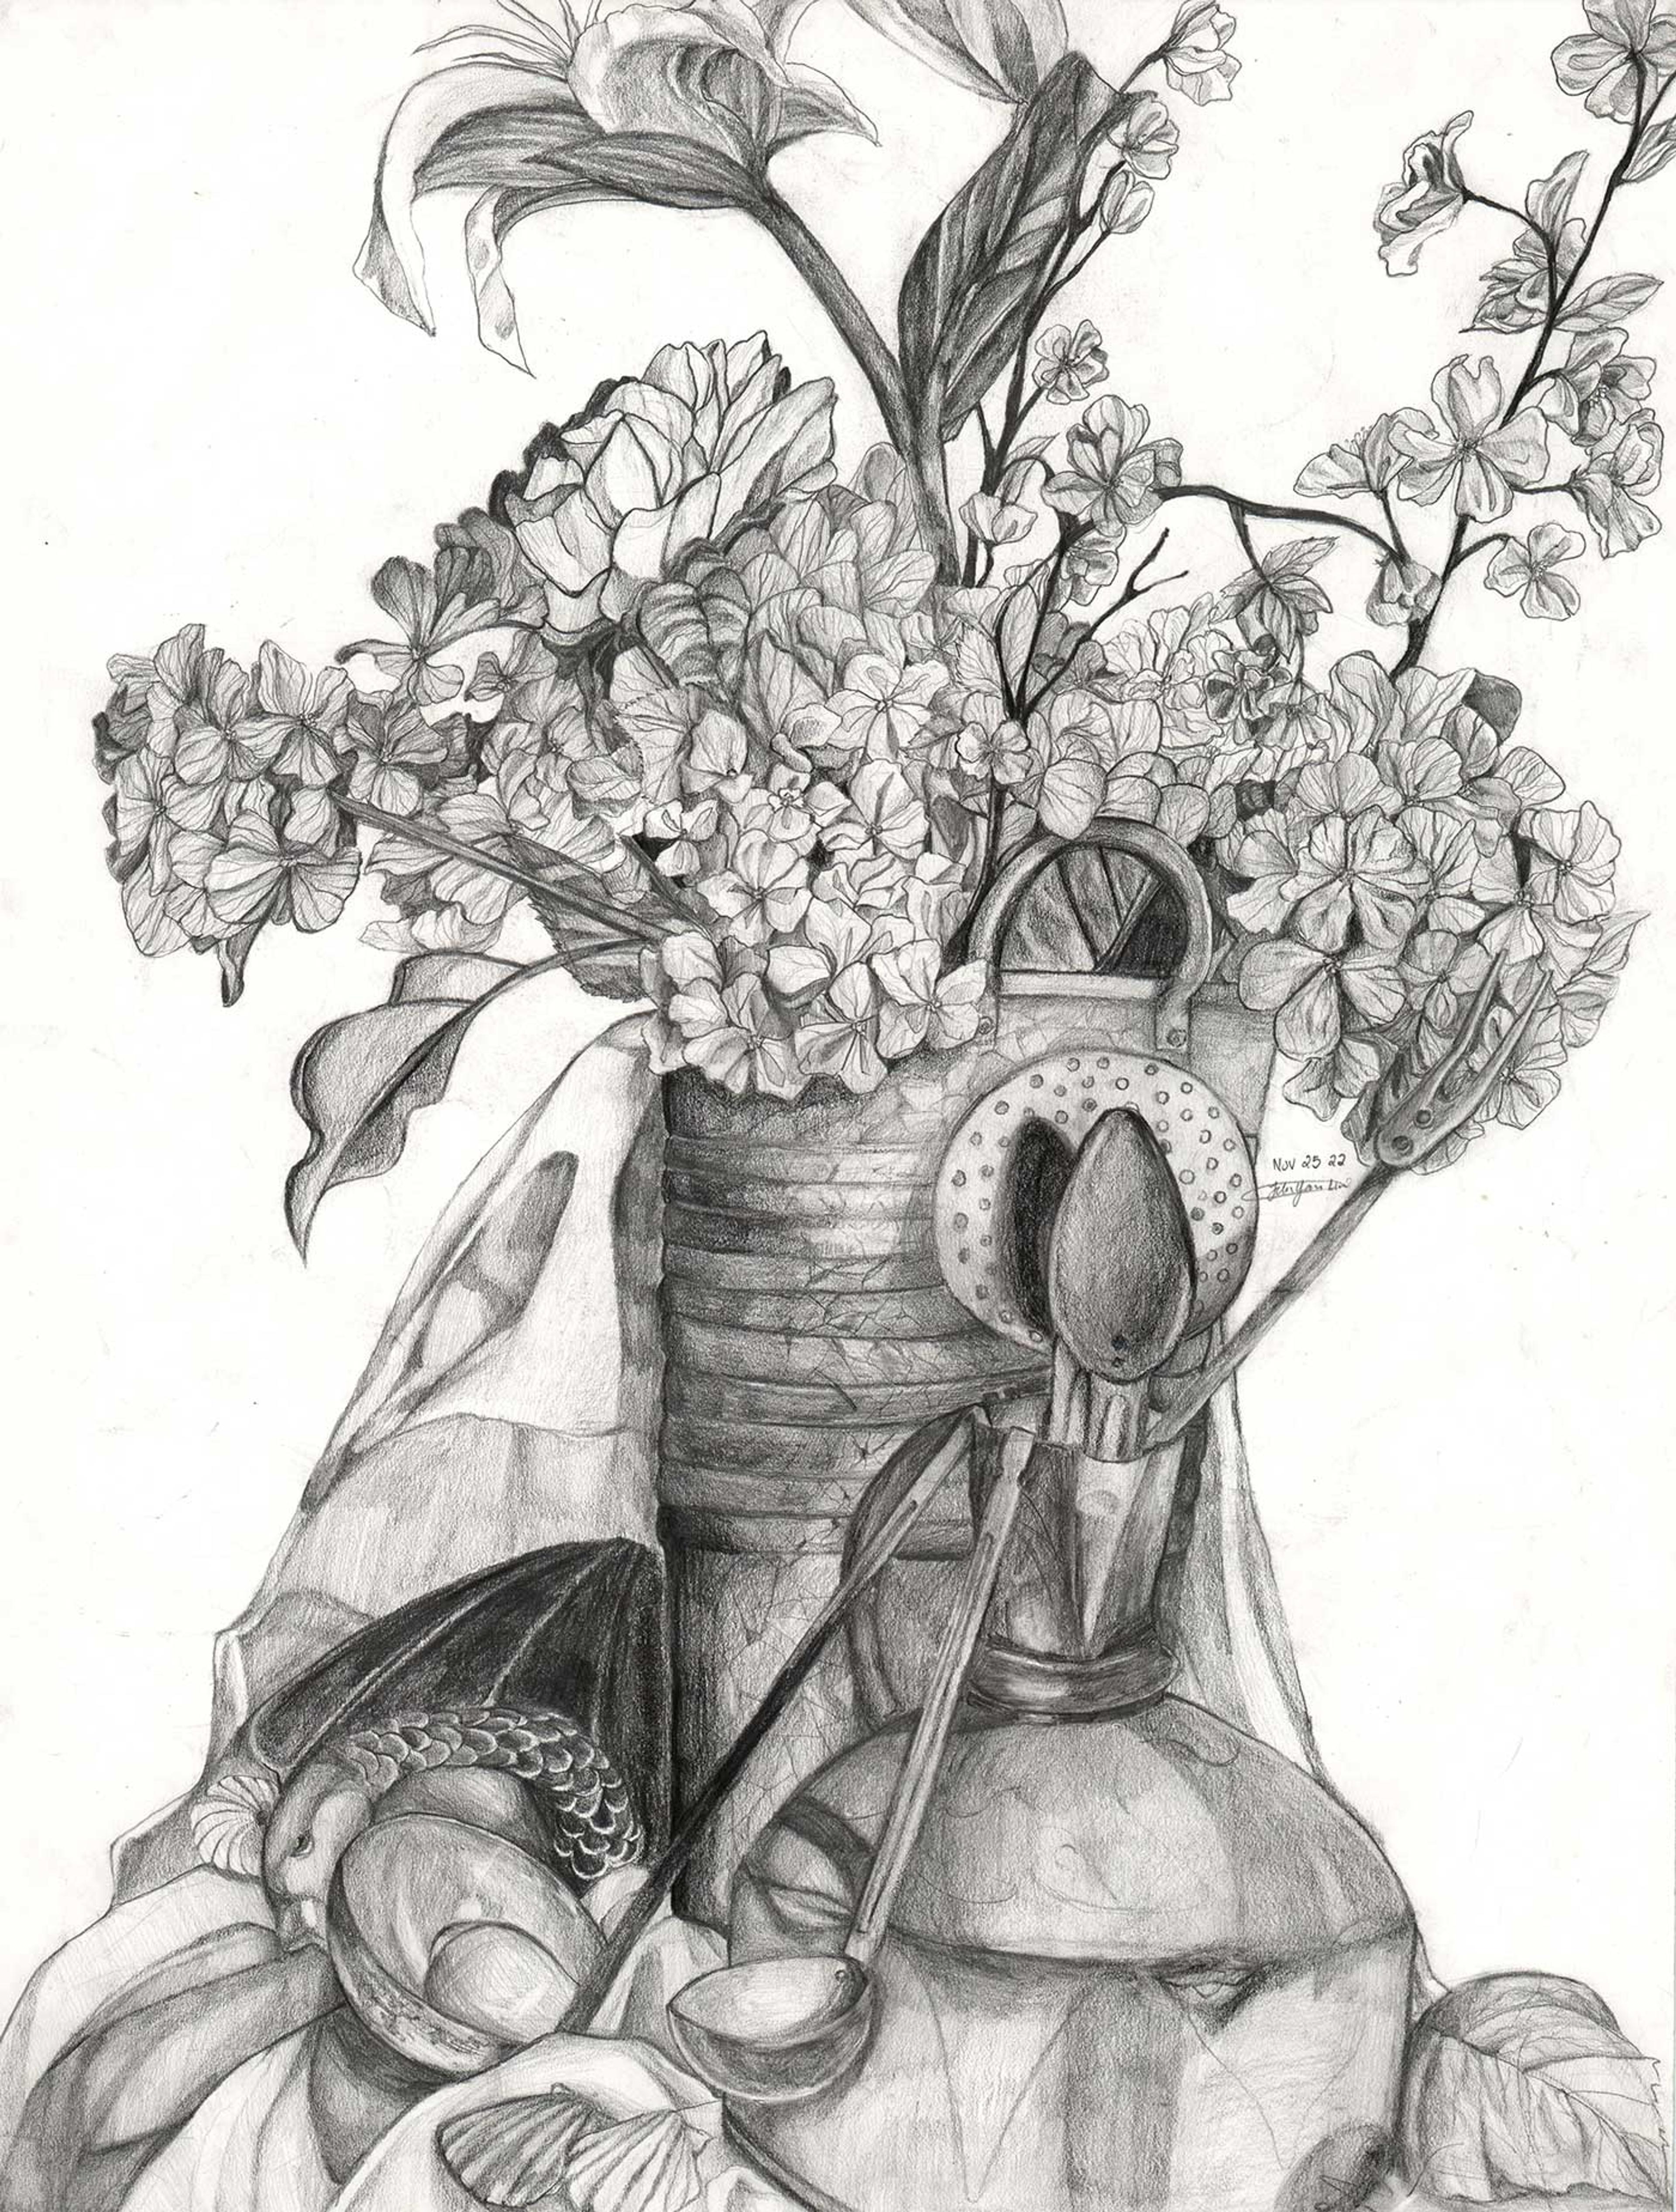 Pencil still life drawing featuring flowers.